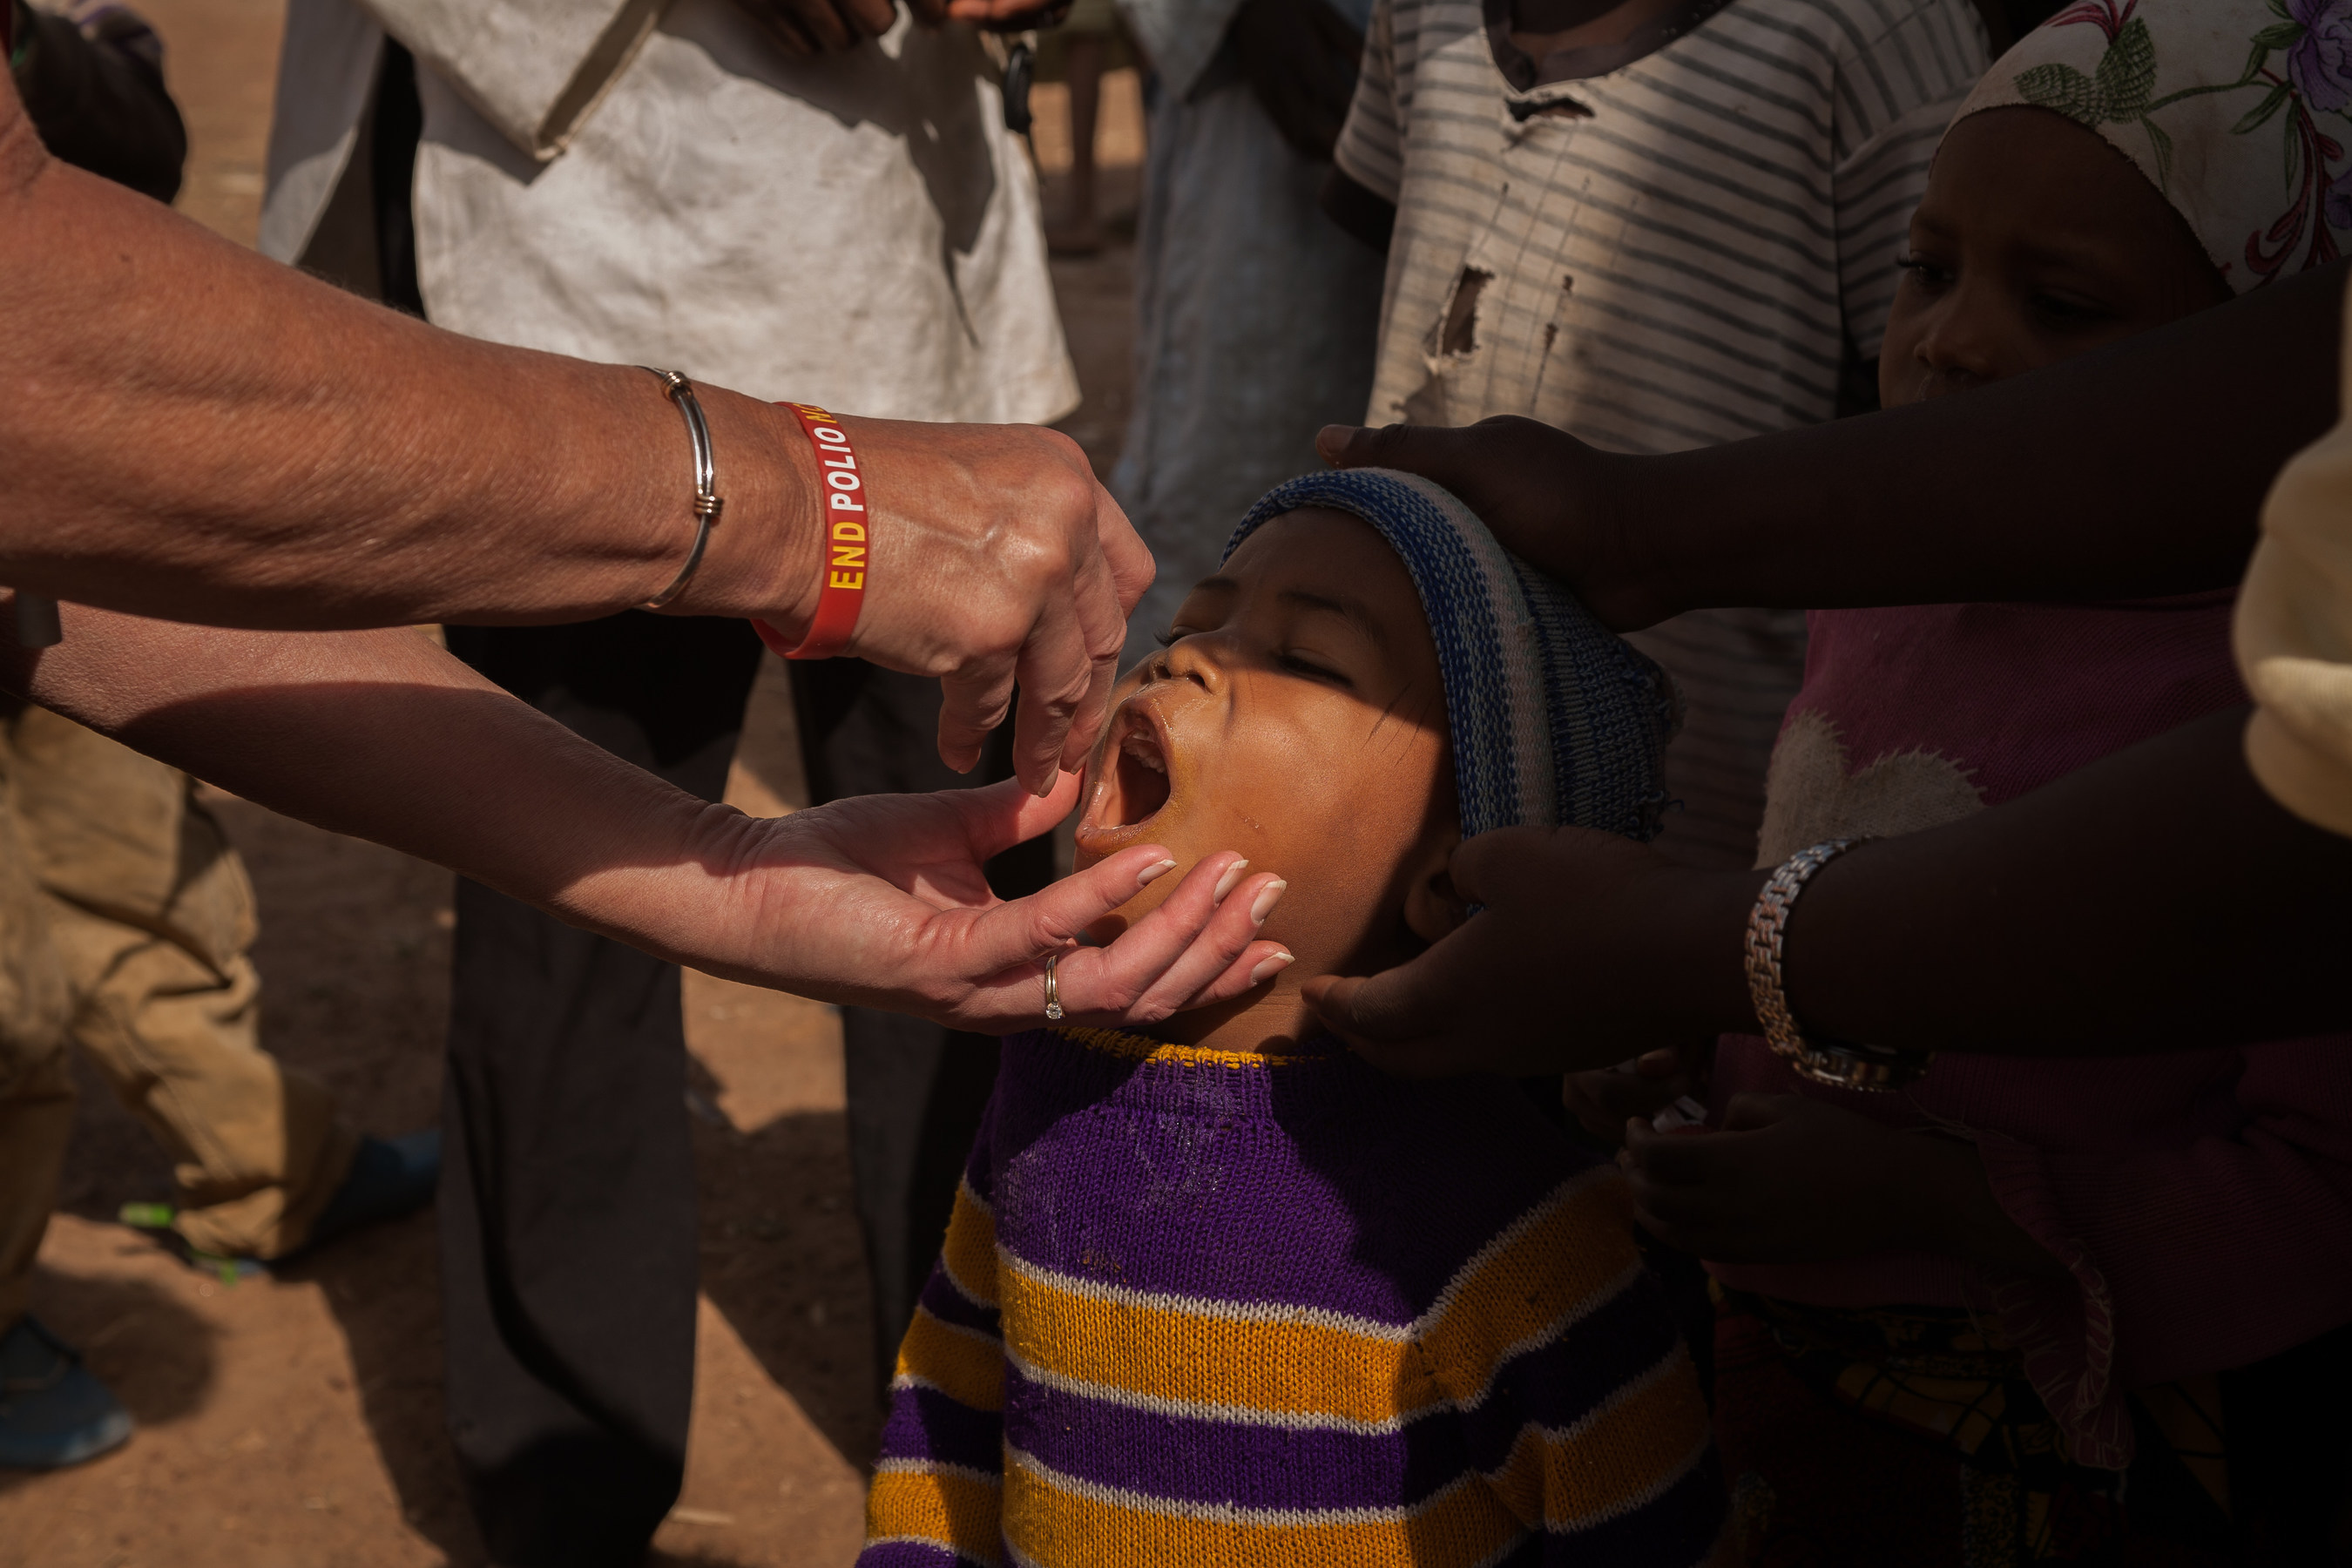 Drops of the oral polio vaccine are given to a child in Nigeria. Photo Credit: Ruth McDowall for Rotary International